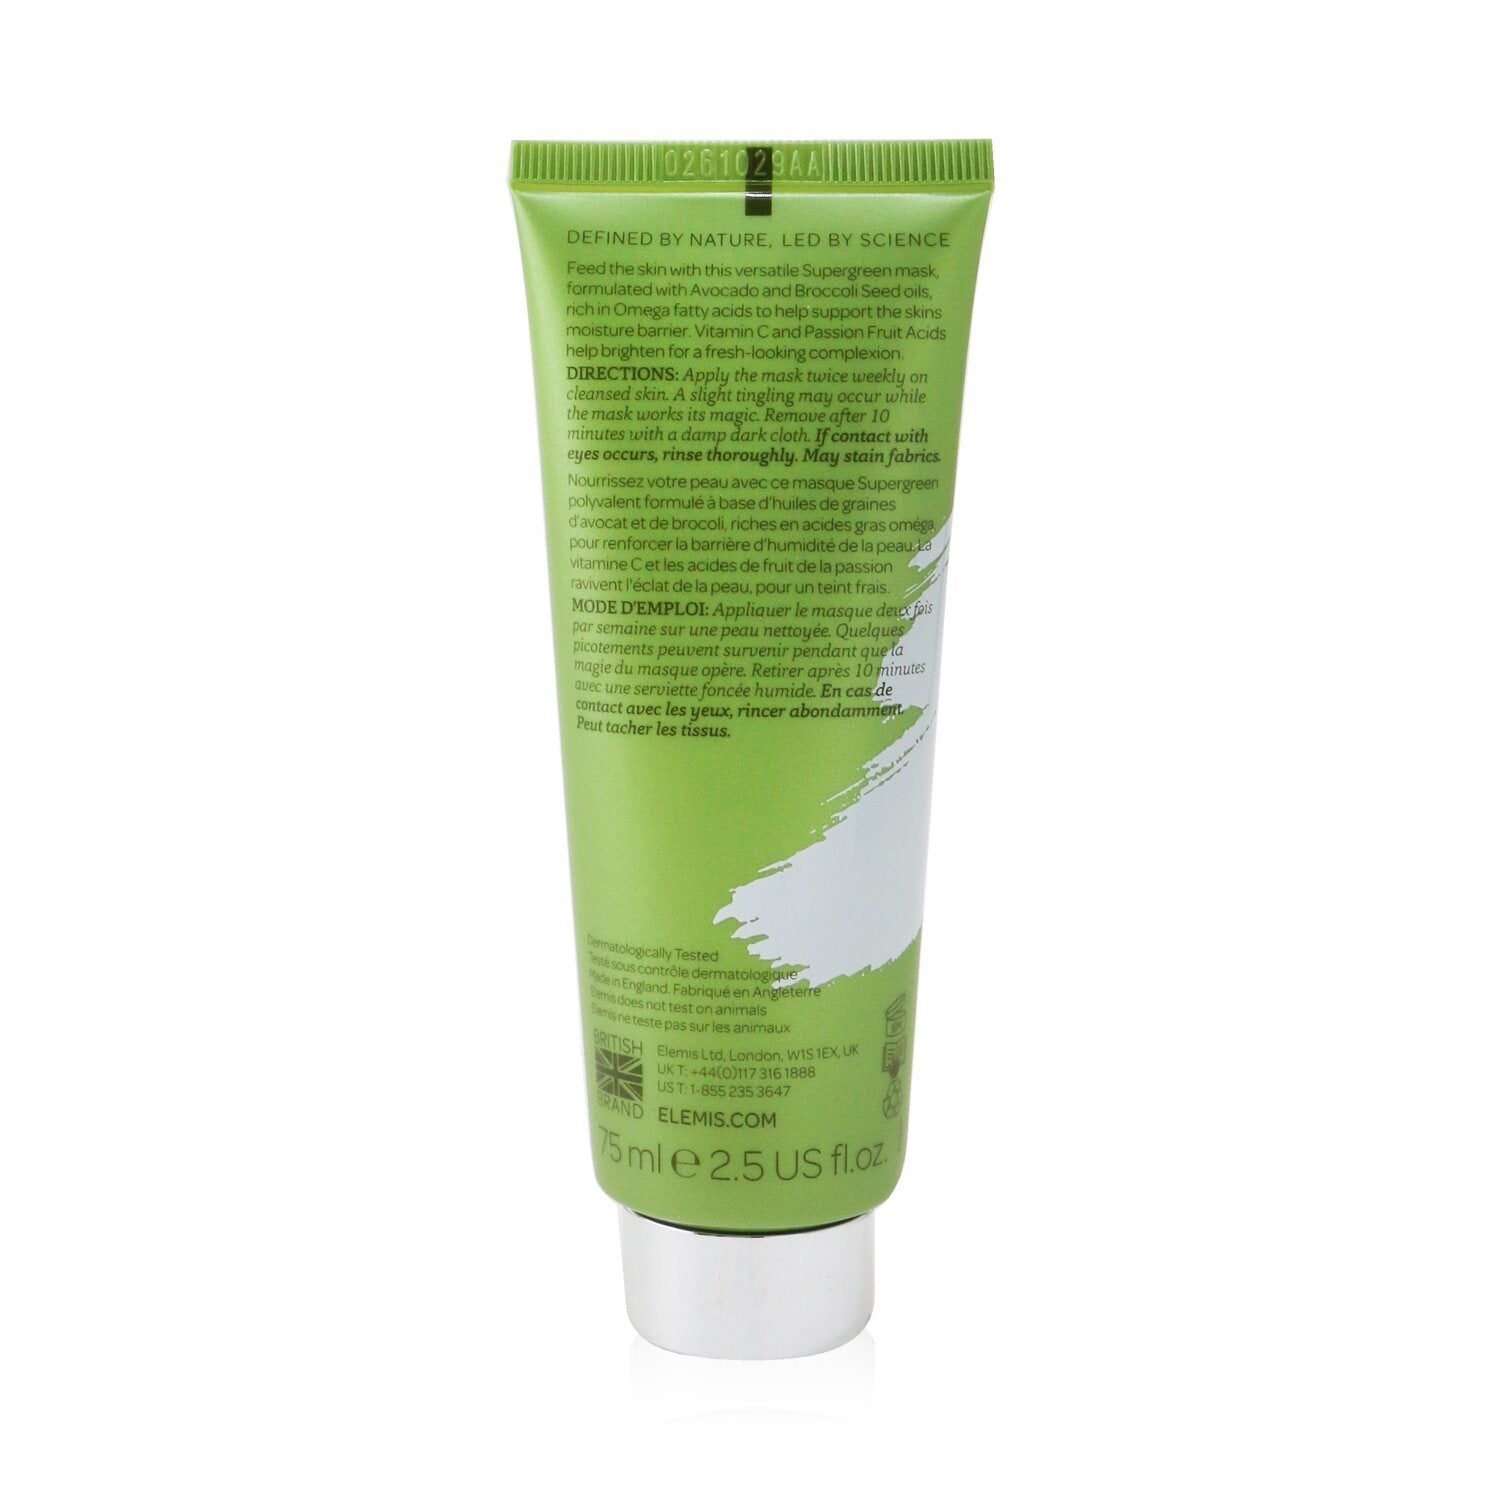 Superfood Vital Veggie Mask is a nourishing and brightening facial mask that provides intense hydration to the skin.